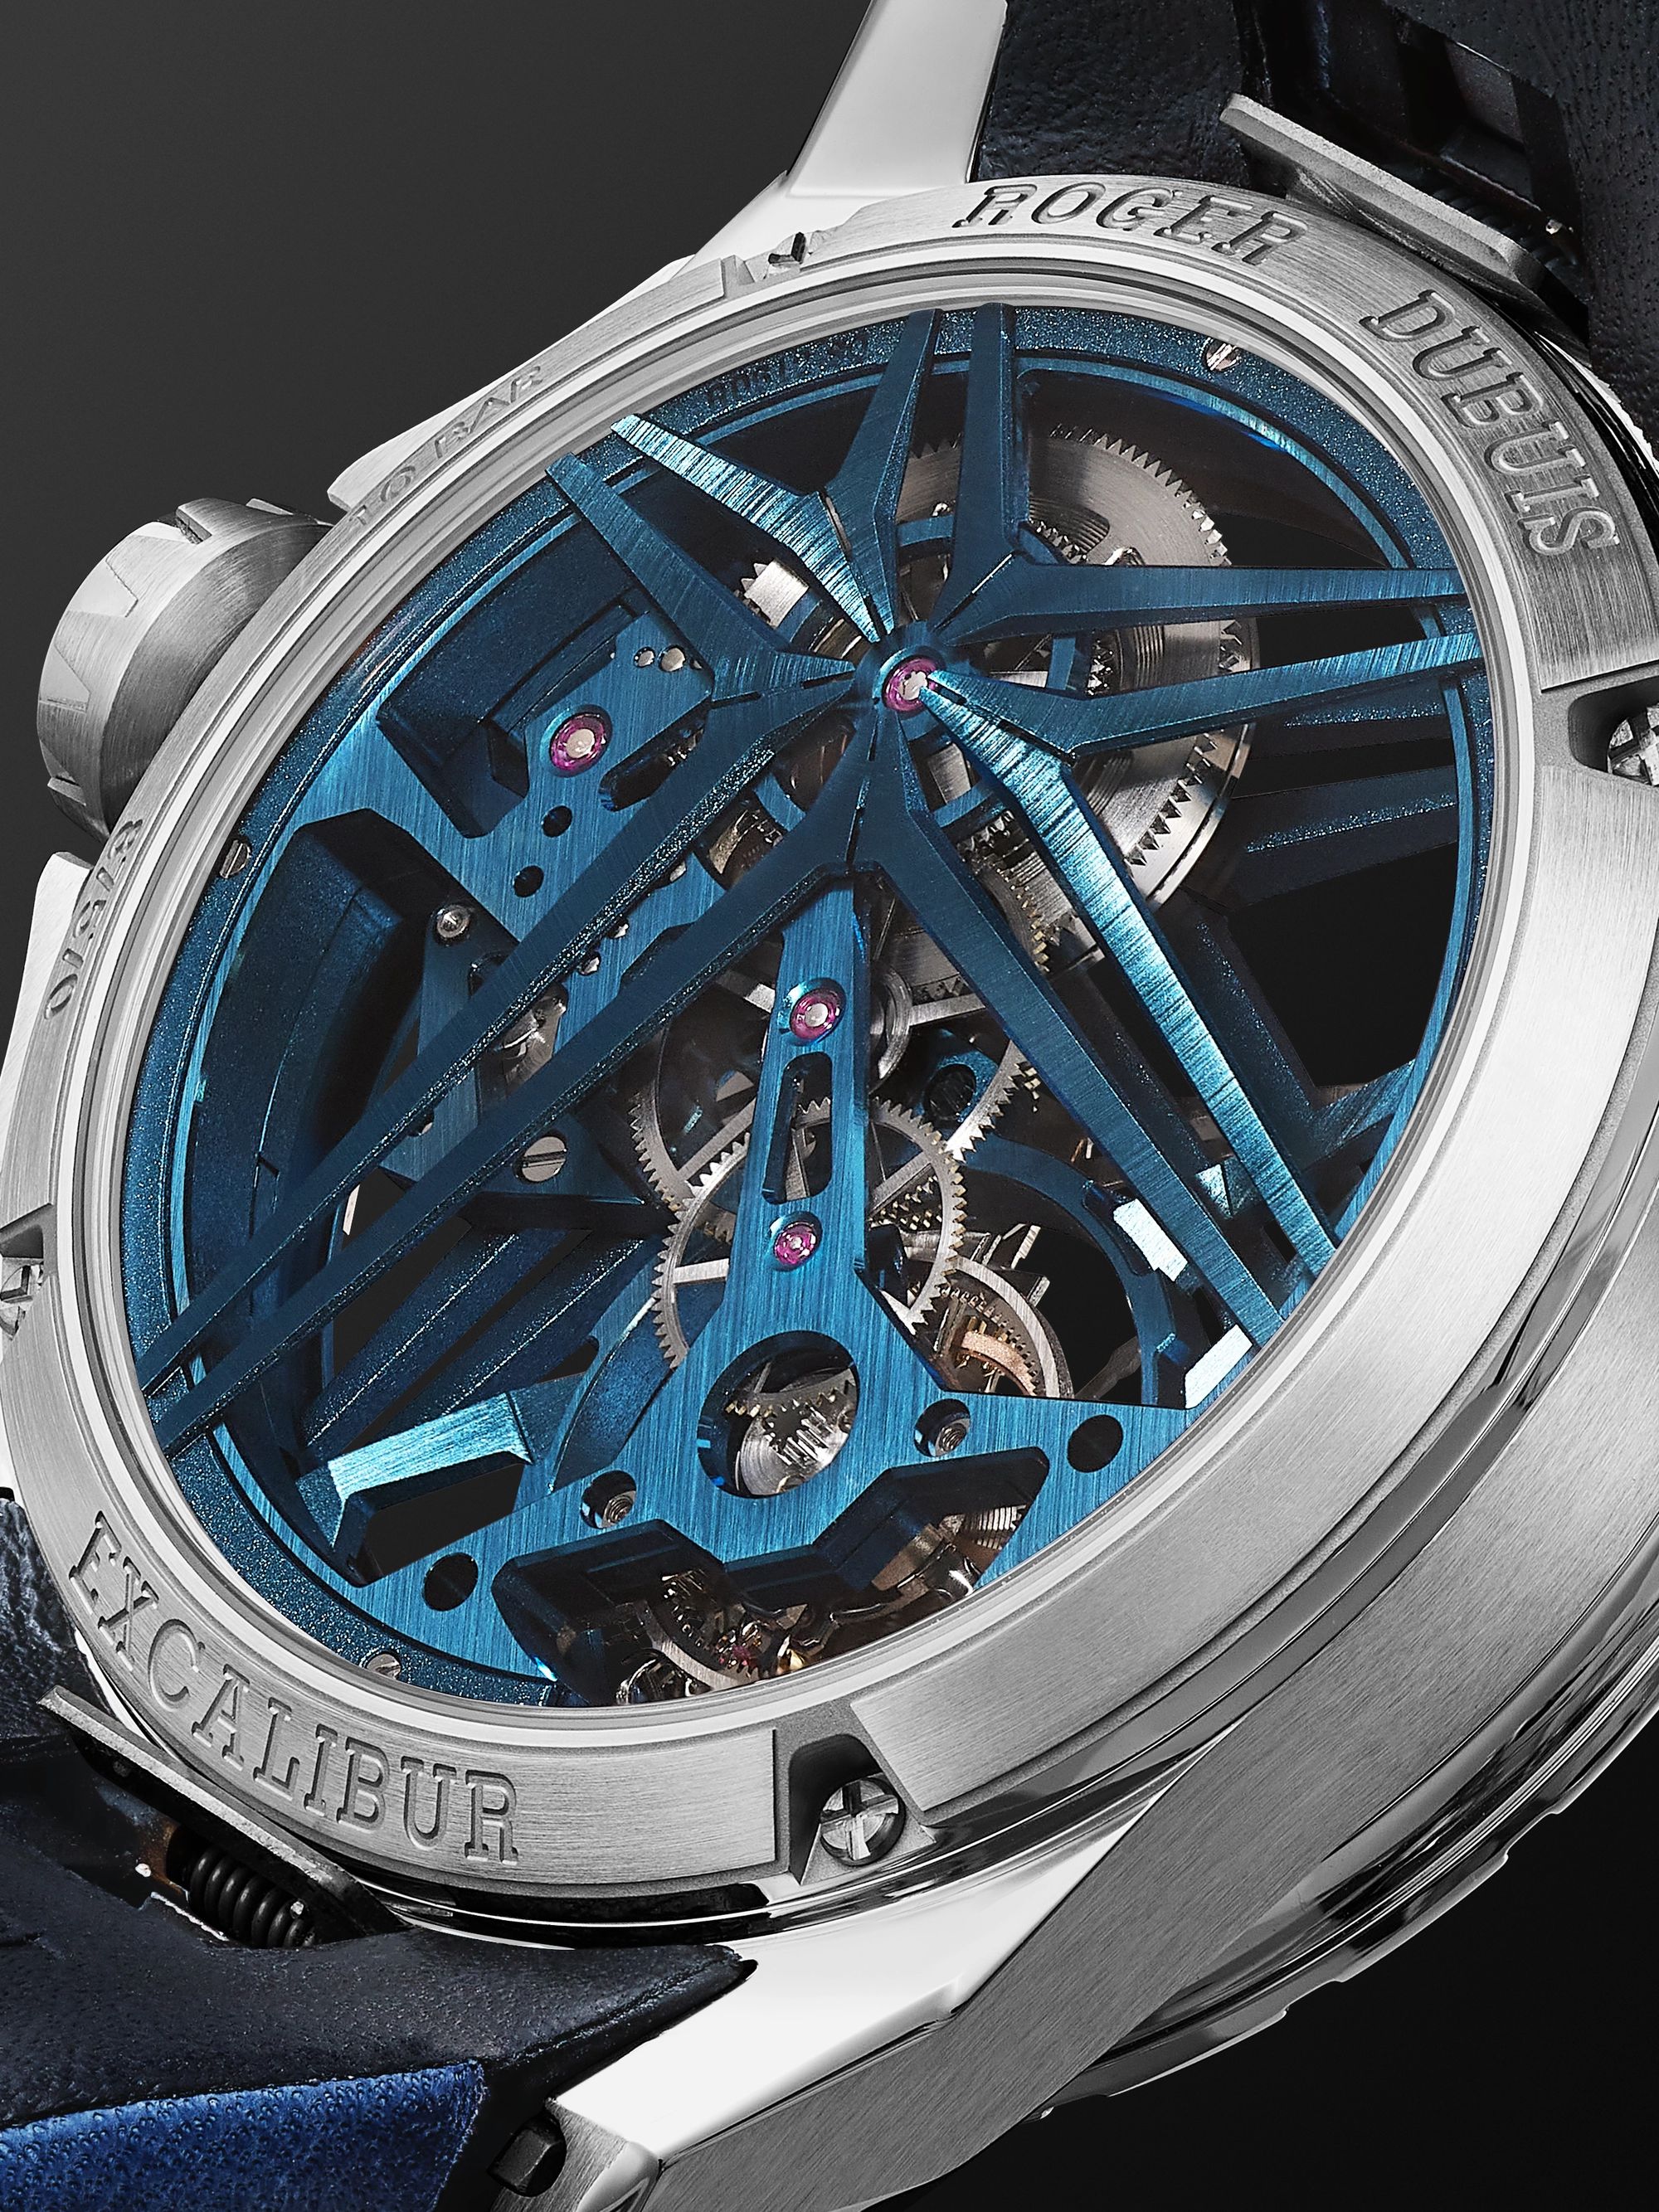 ROGER DUBUIS Excalibur Cobalt Blue Limited Edition Flying Tourbillon Hand-Wound 42mm CarTech Micro-Melt BioDur CCMTM and Leather Watch, Ref. No. DBEX0838